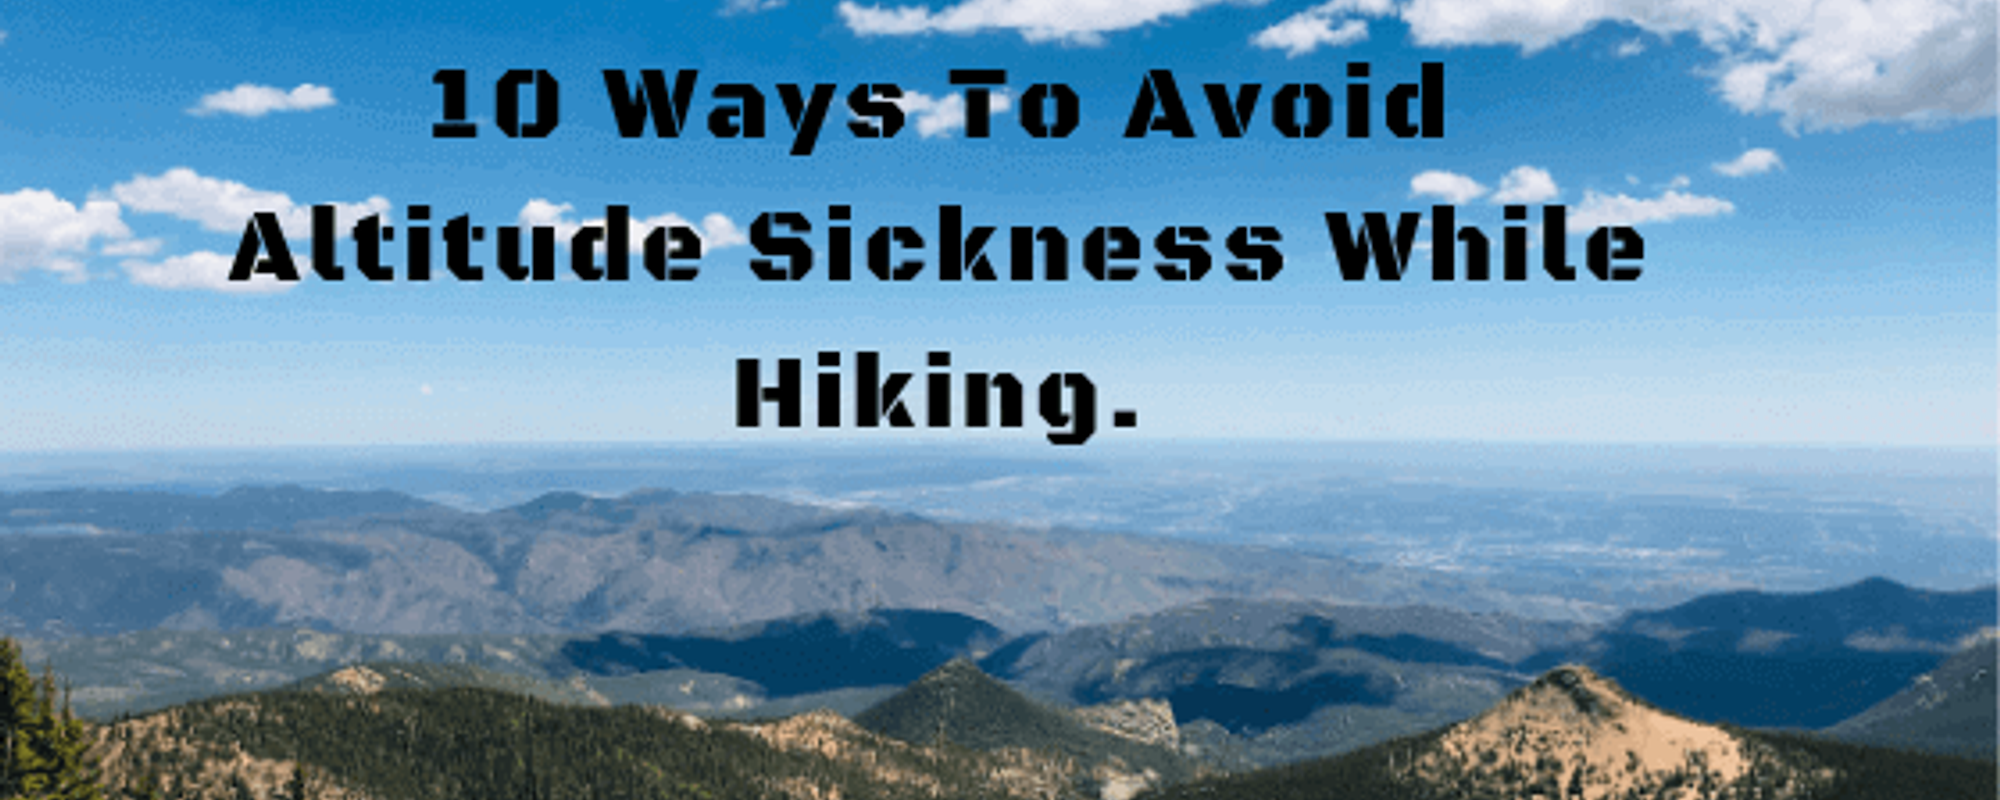 10 WAYS TO AVOID ALTITUDE SICKNESS WHILE HIKING